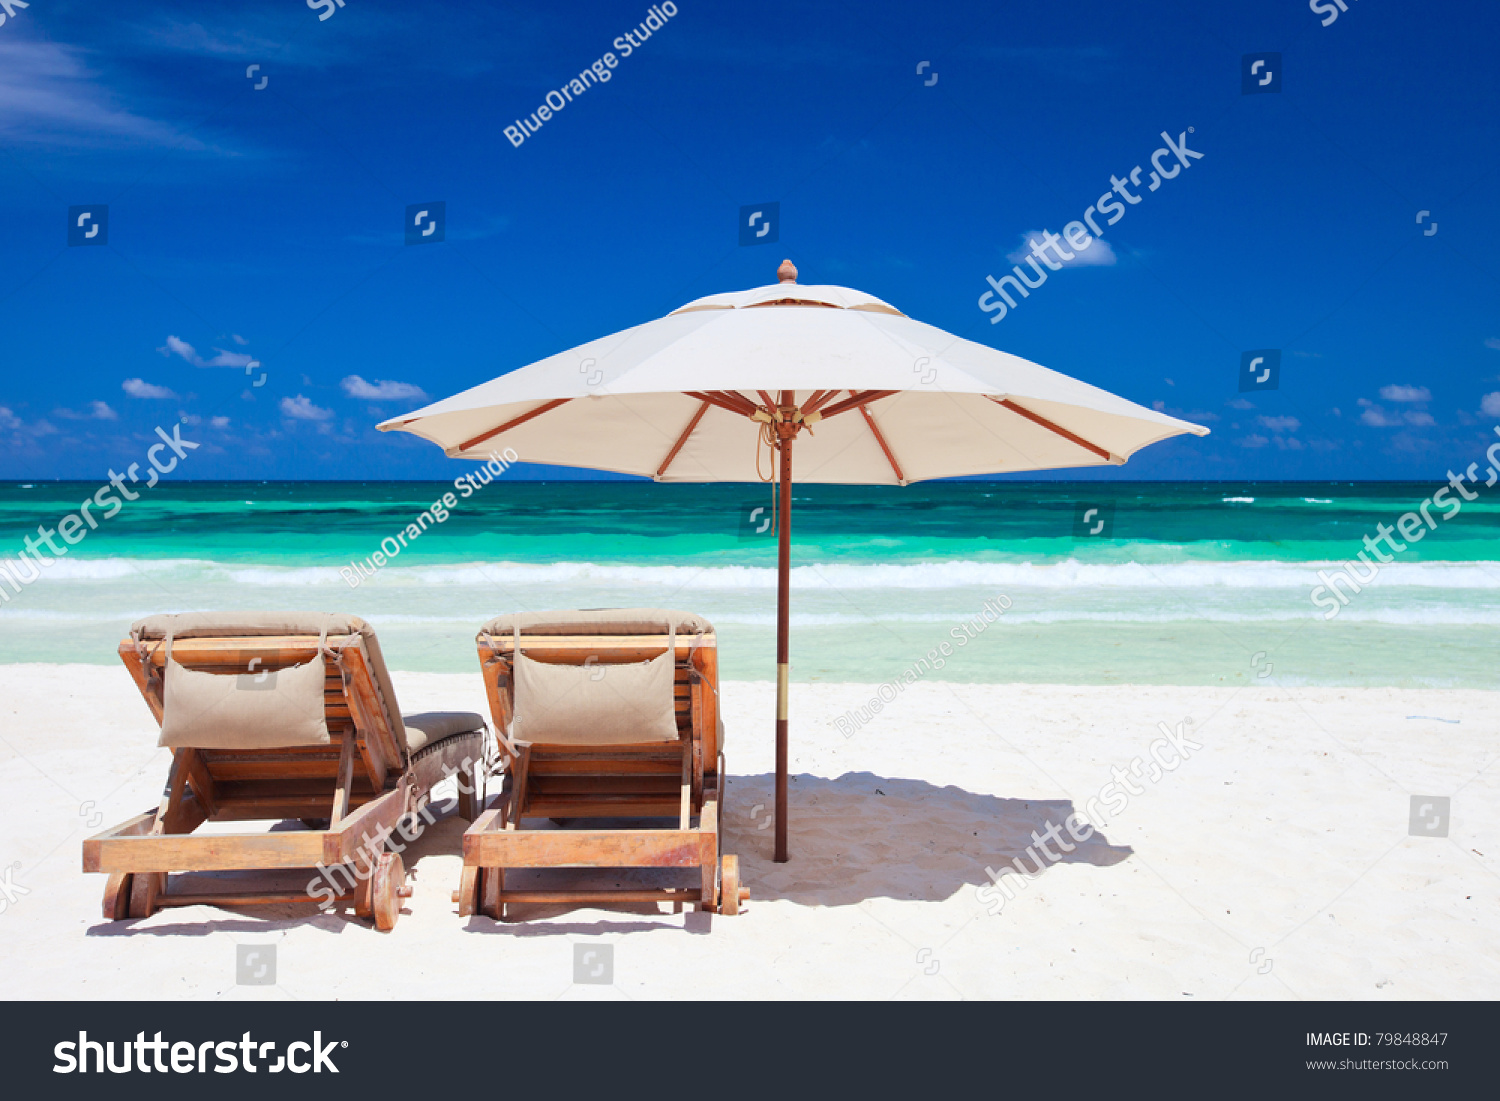 Two chairs and umbrella on stunning tropical beach in Tulum, Mexico #79848847